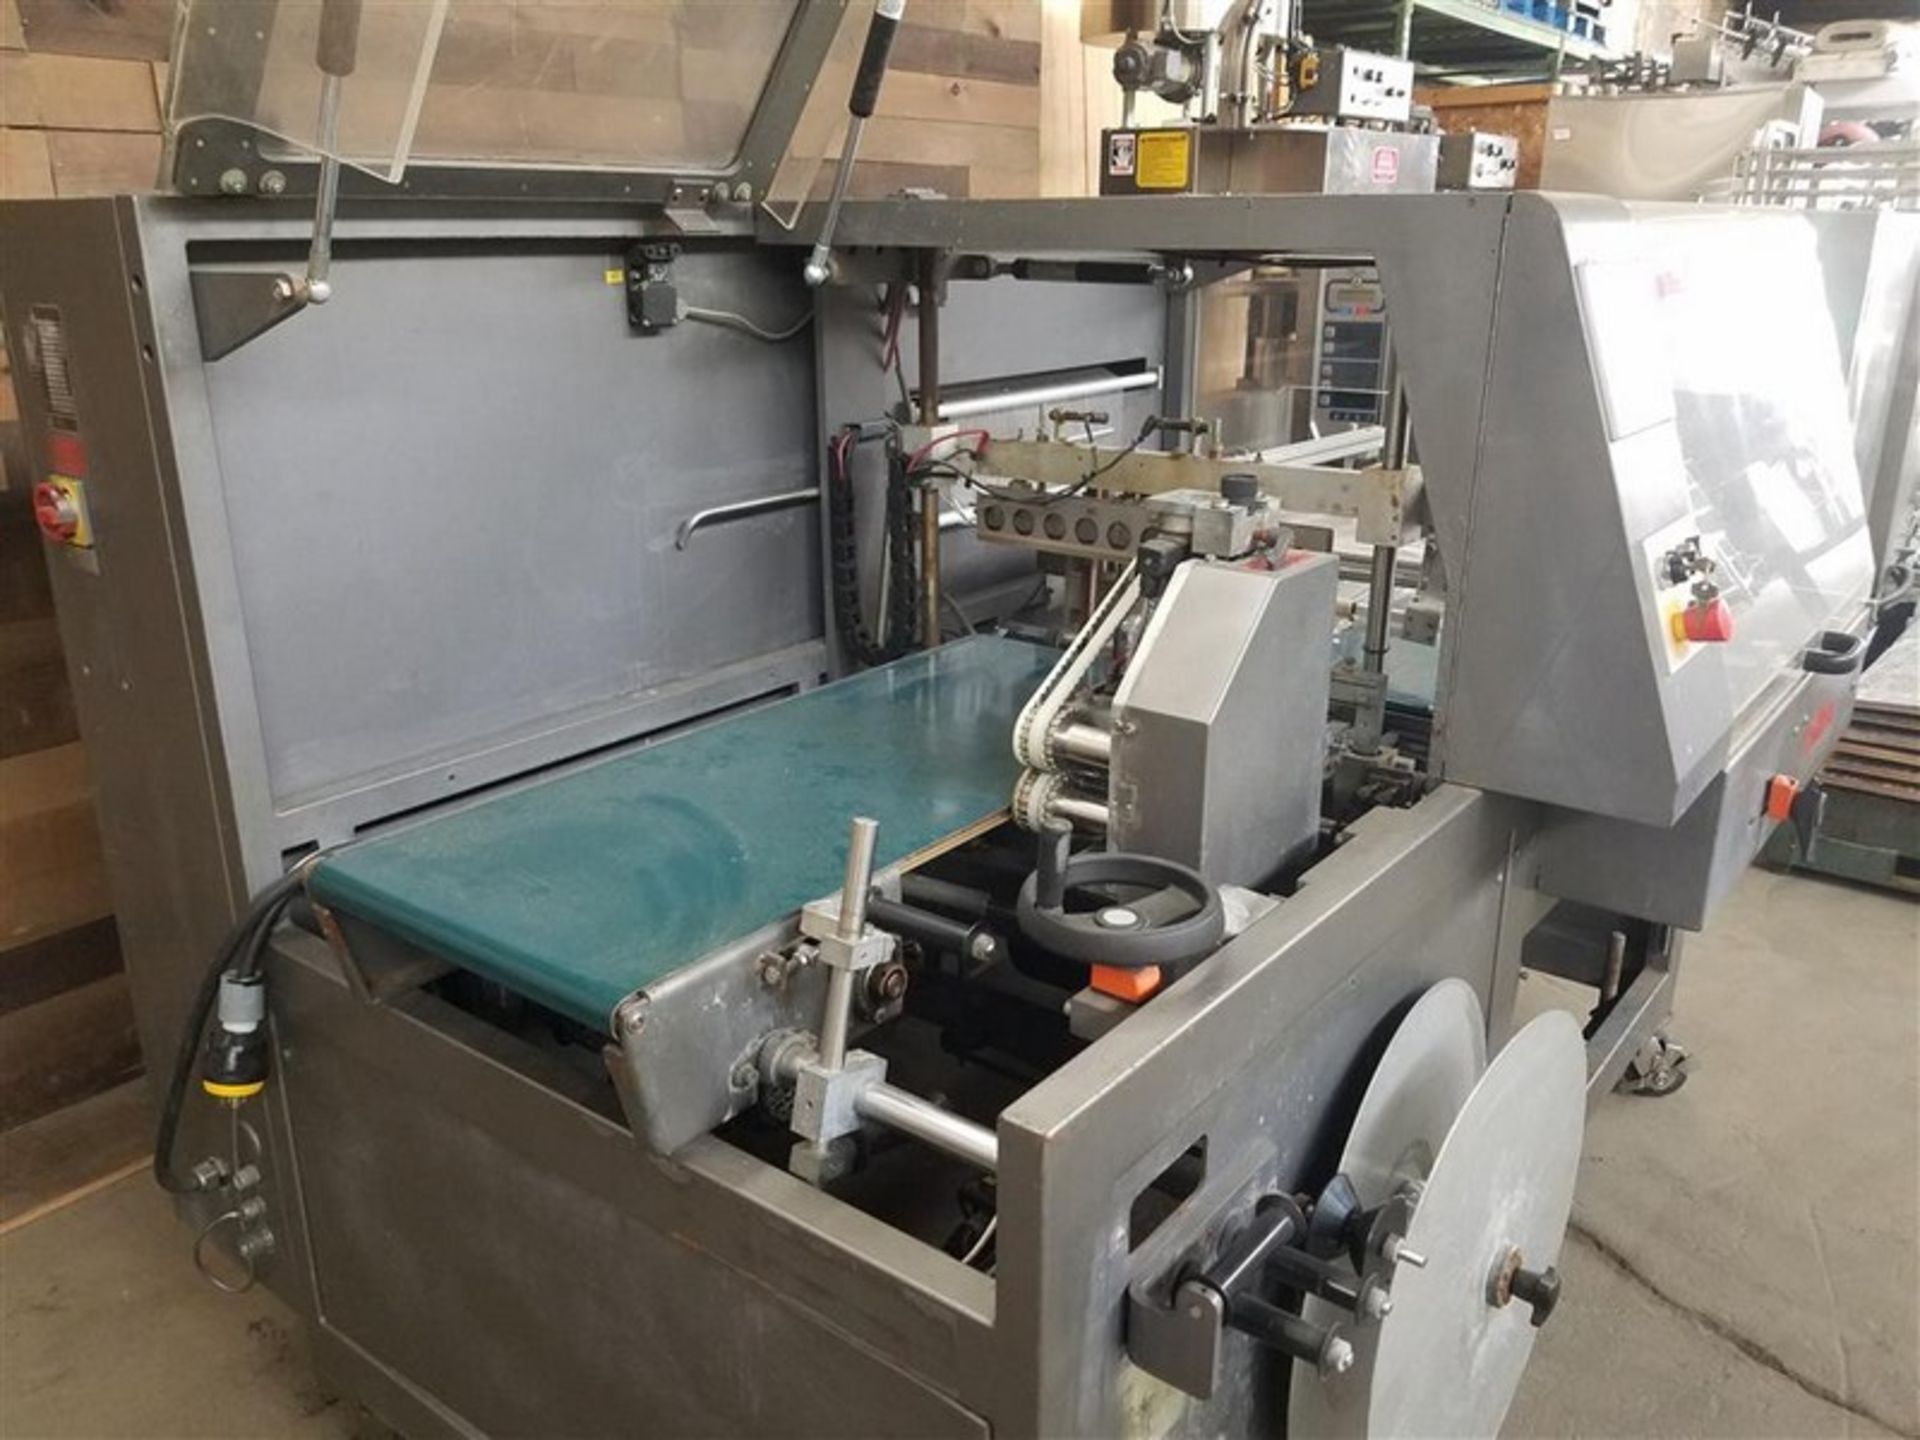 Kallfass Universal 400NT Automatic Side Sealer Shrink Wrapper, S/N N/A - ID Plate Unreadable, 480 V, - Image 3 of 9